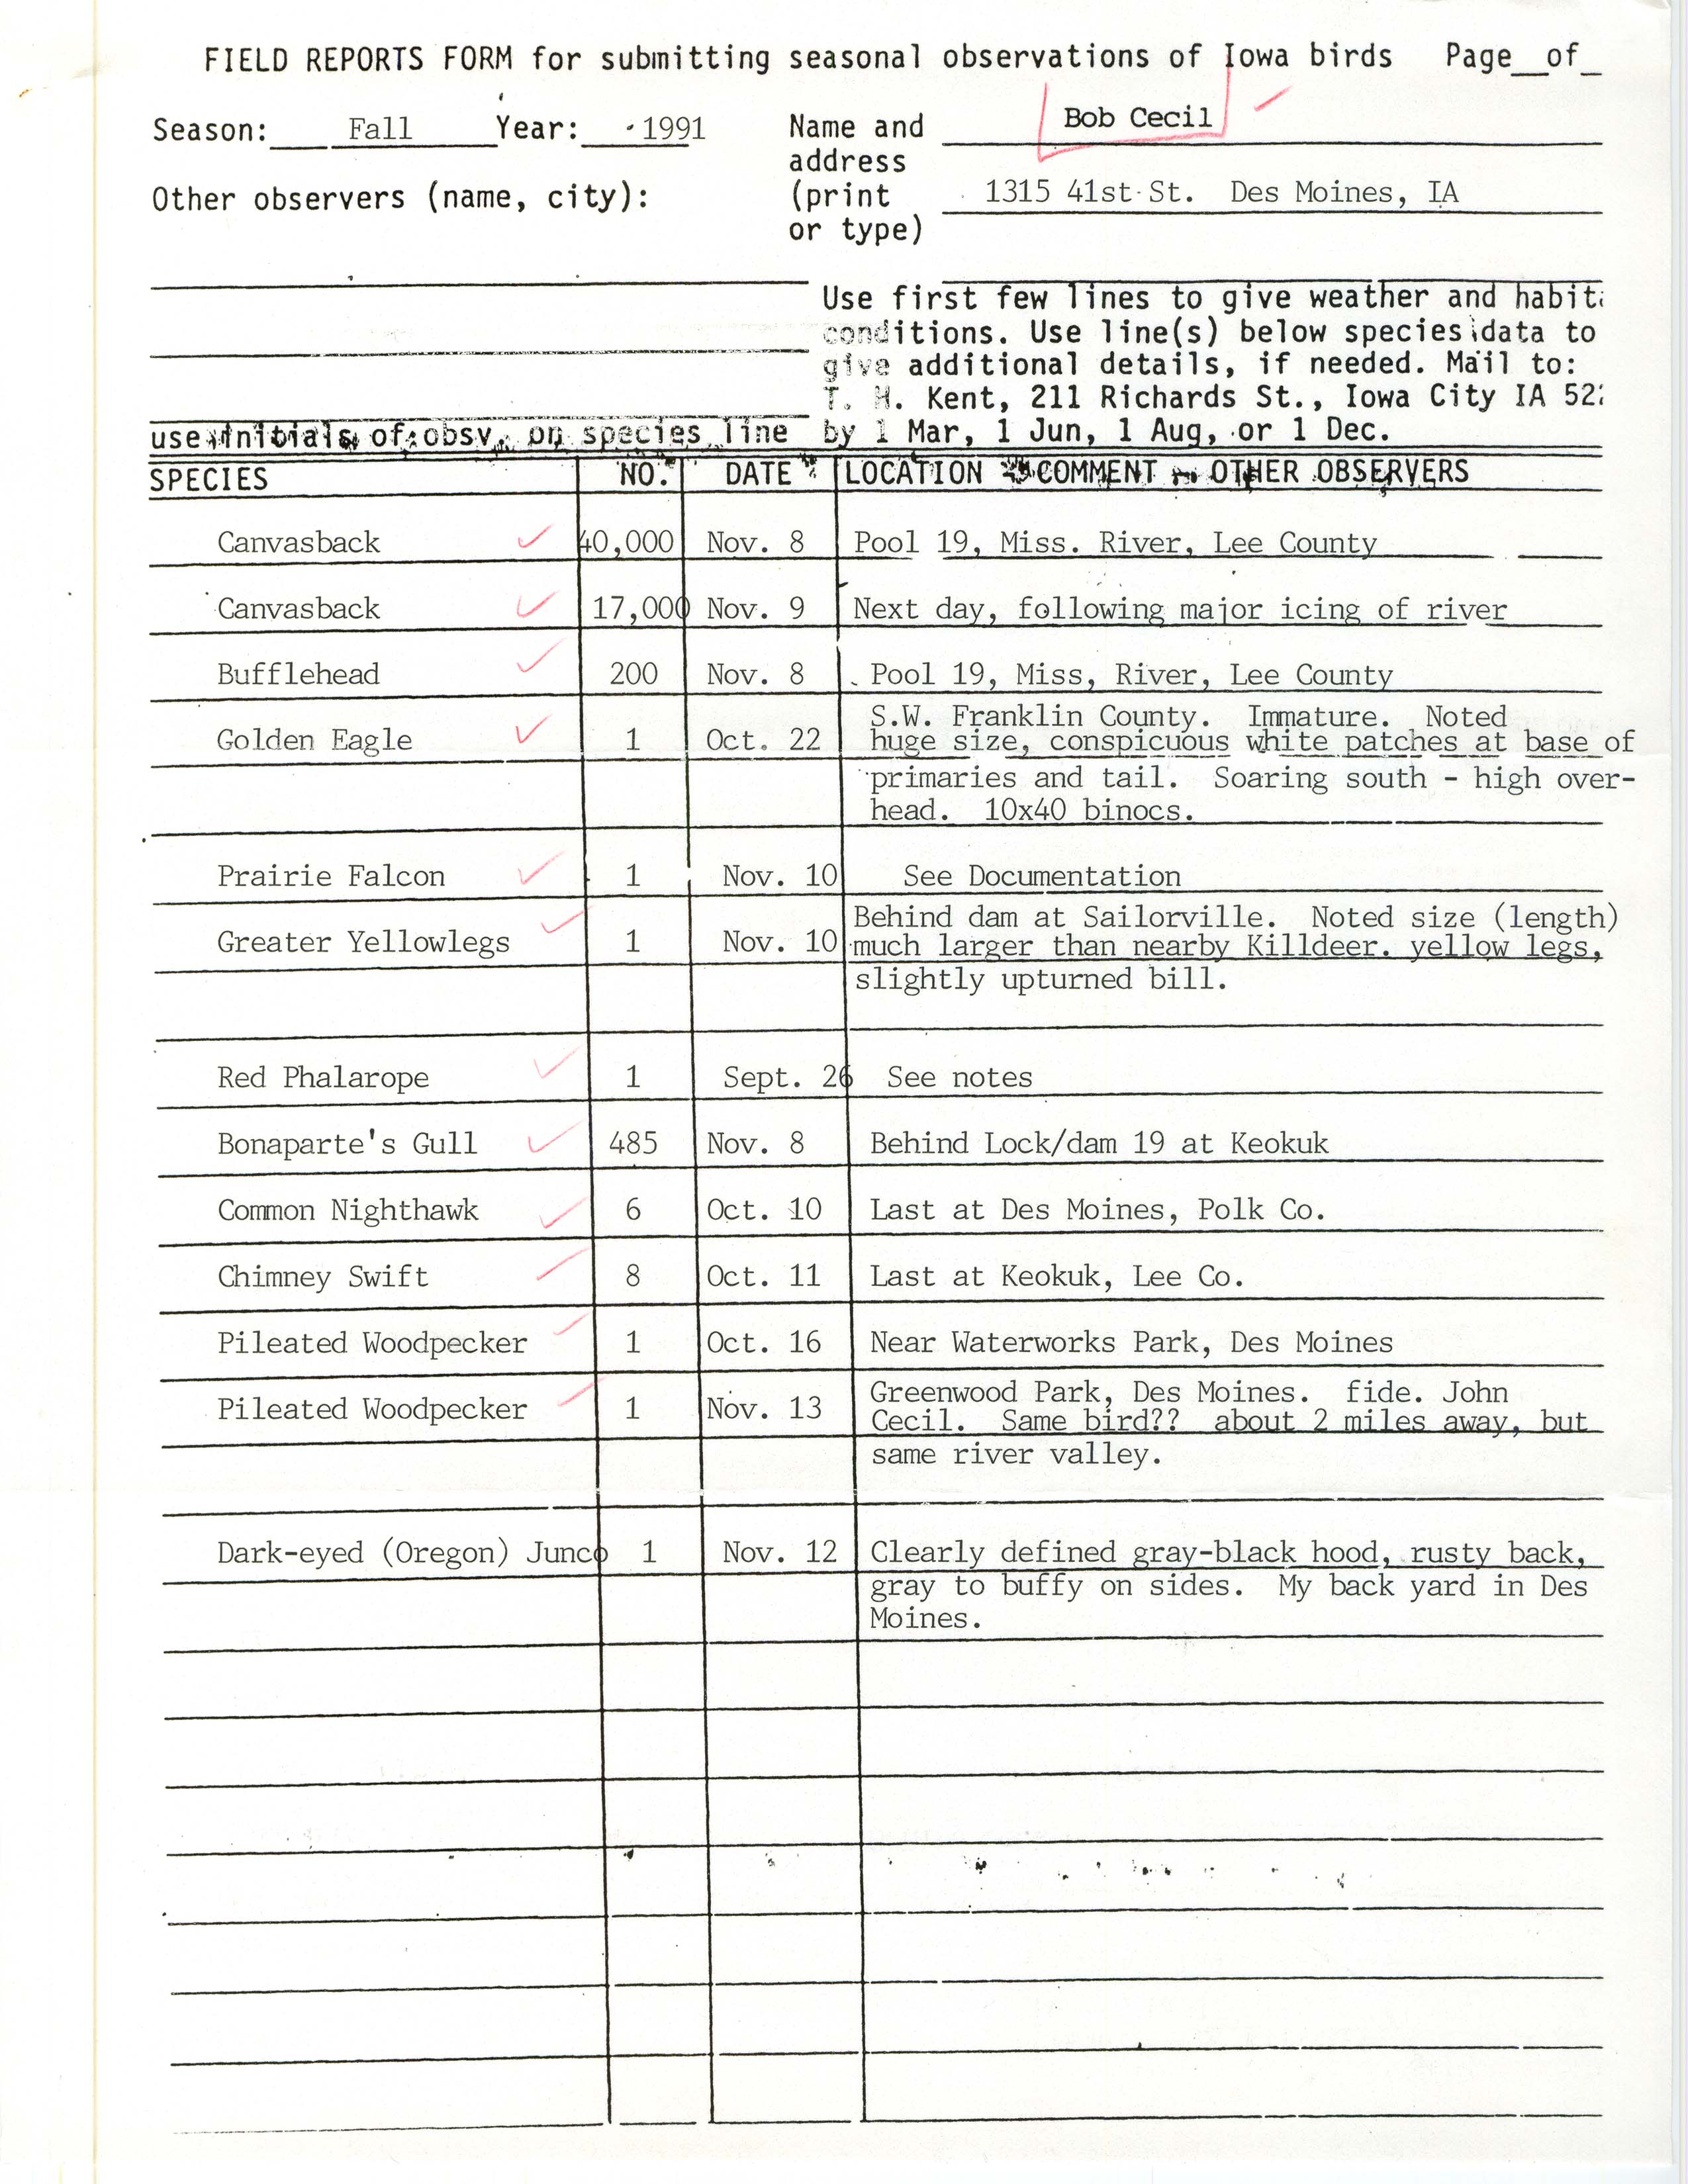 Field reports form for submitting seasonal observations of Iowa birds, Robert I. Cecil, fall 1991